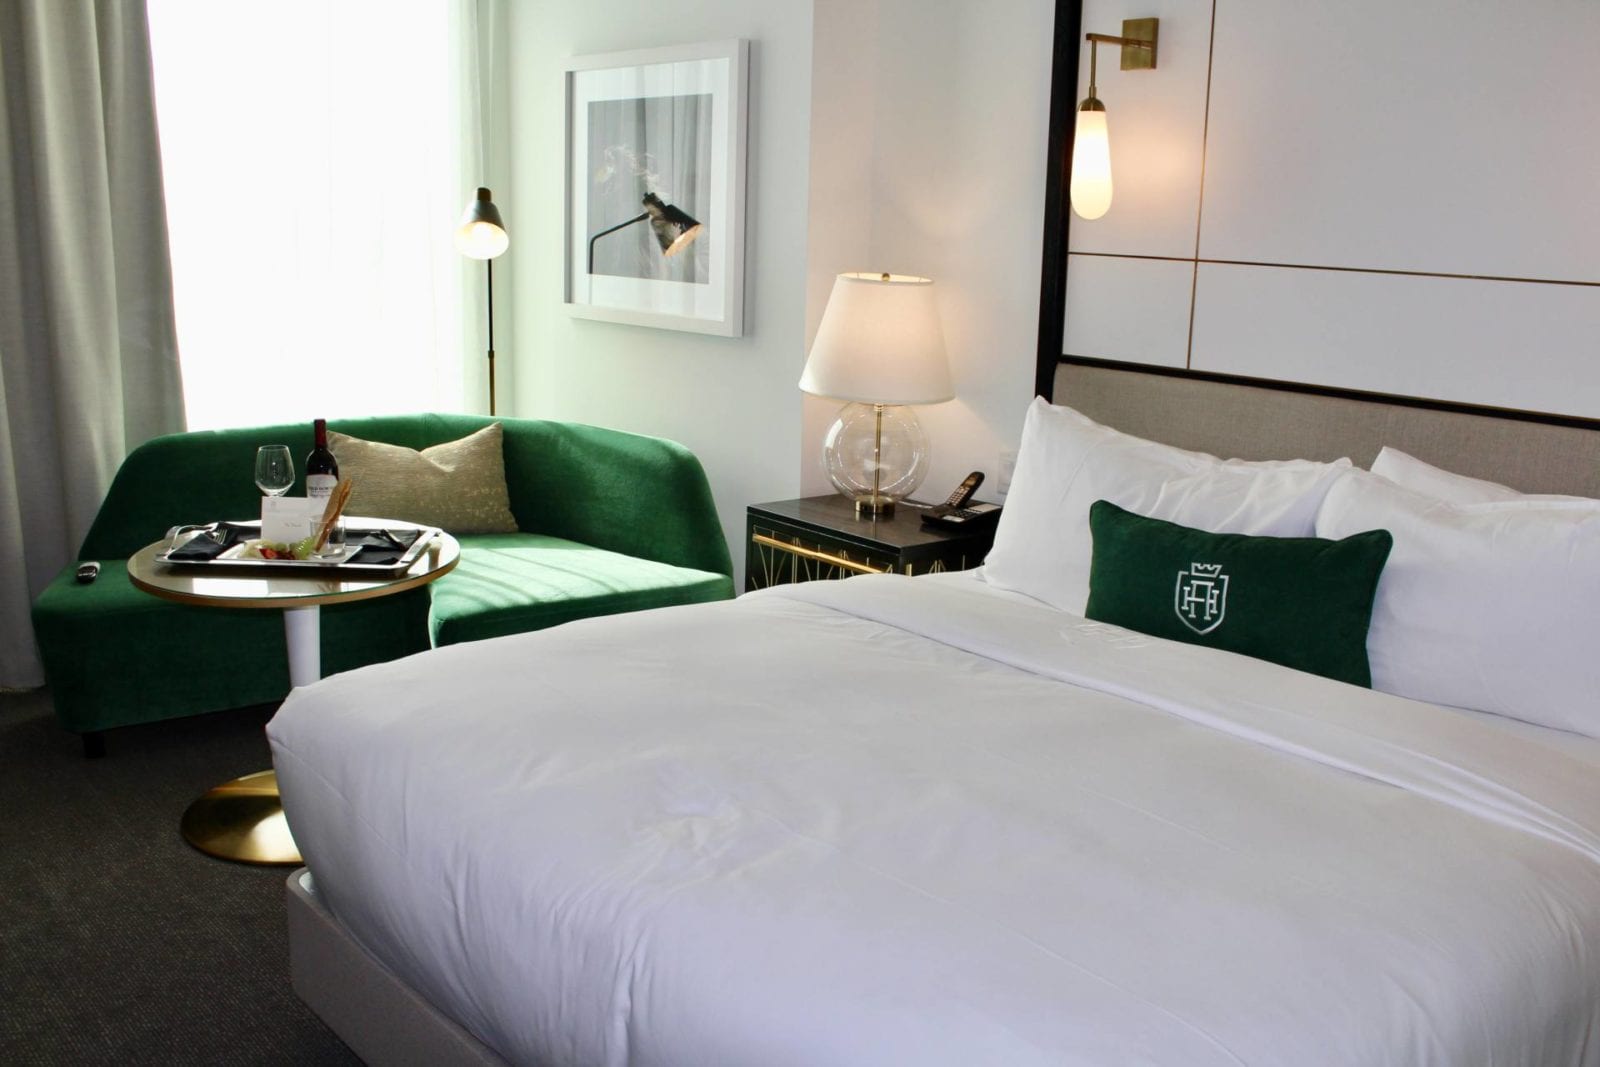 A Staycation at Hotel Alessandra Houston | The B Werd